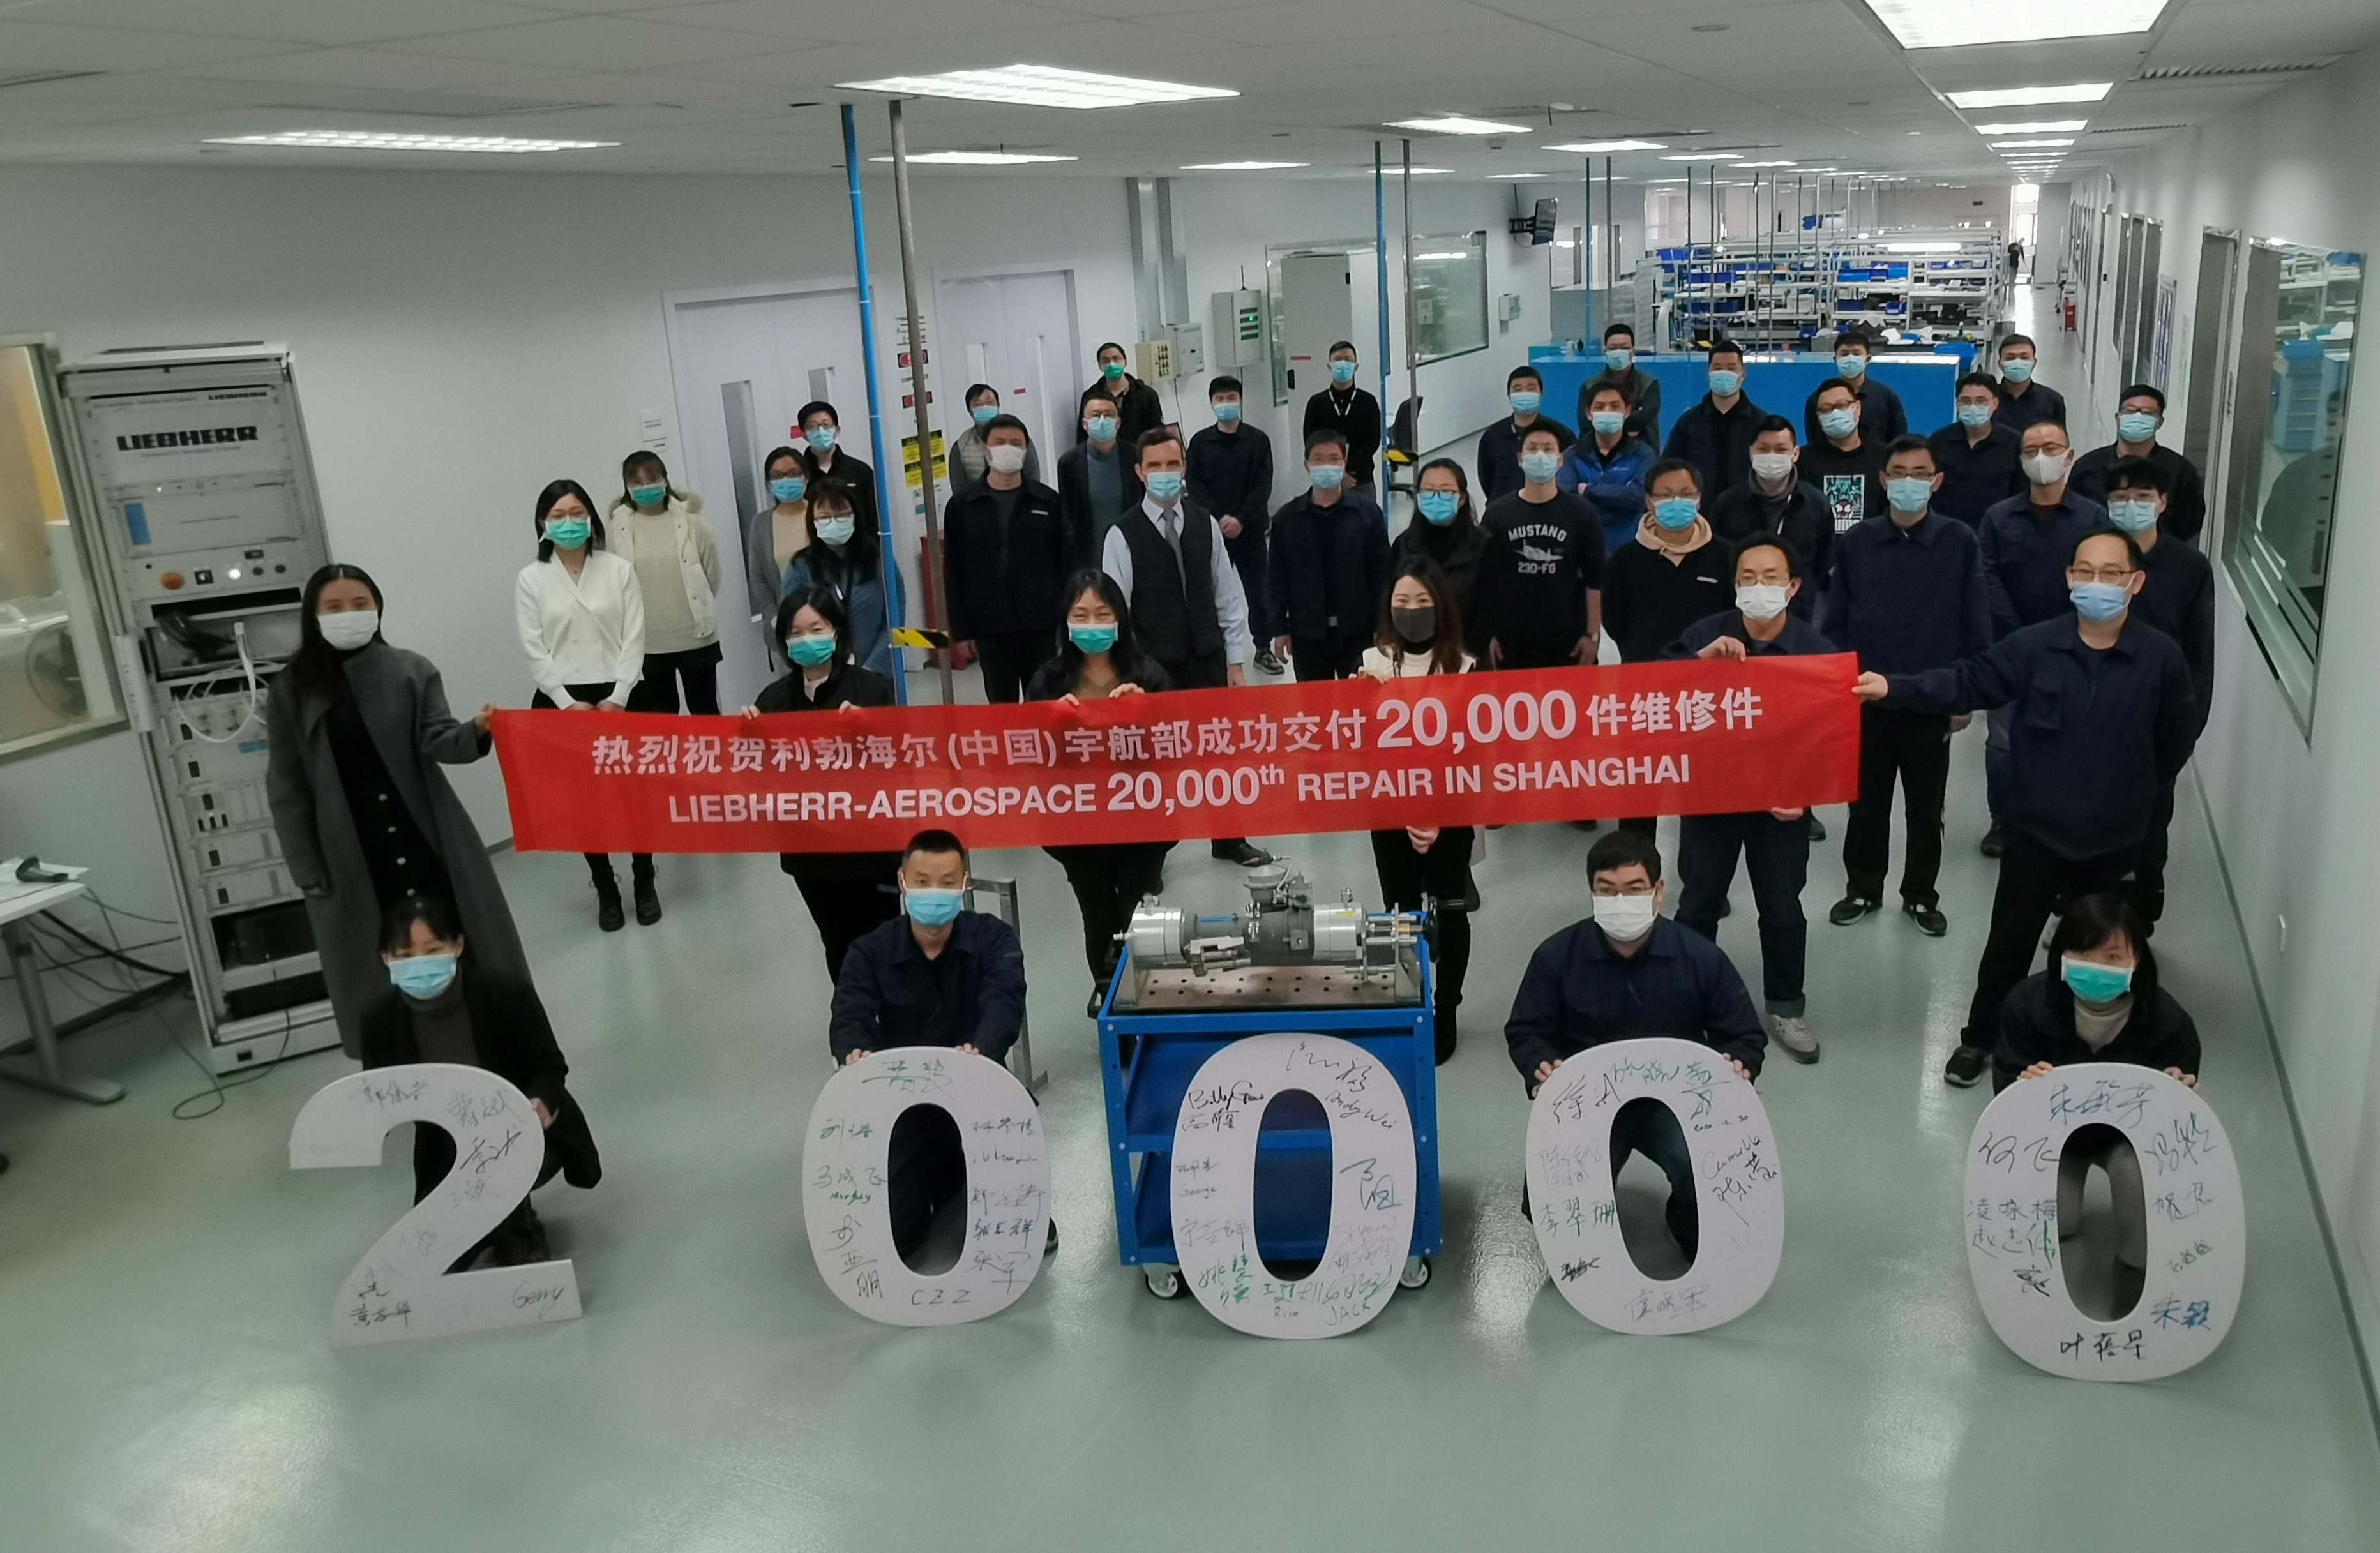 Liebherr celebrates over 20,000 repairs of aerospace components in China